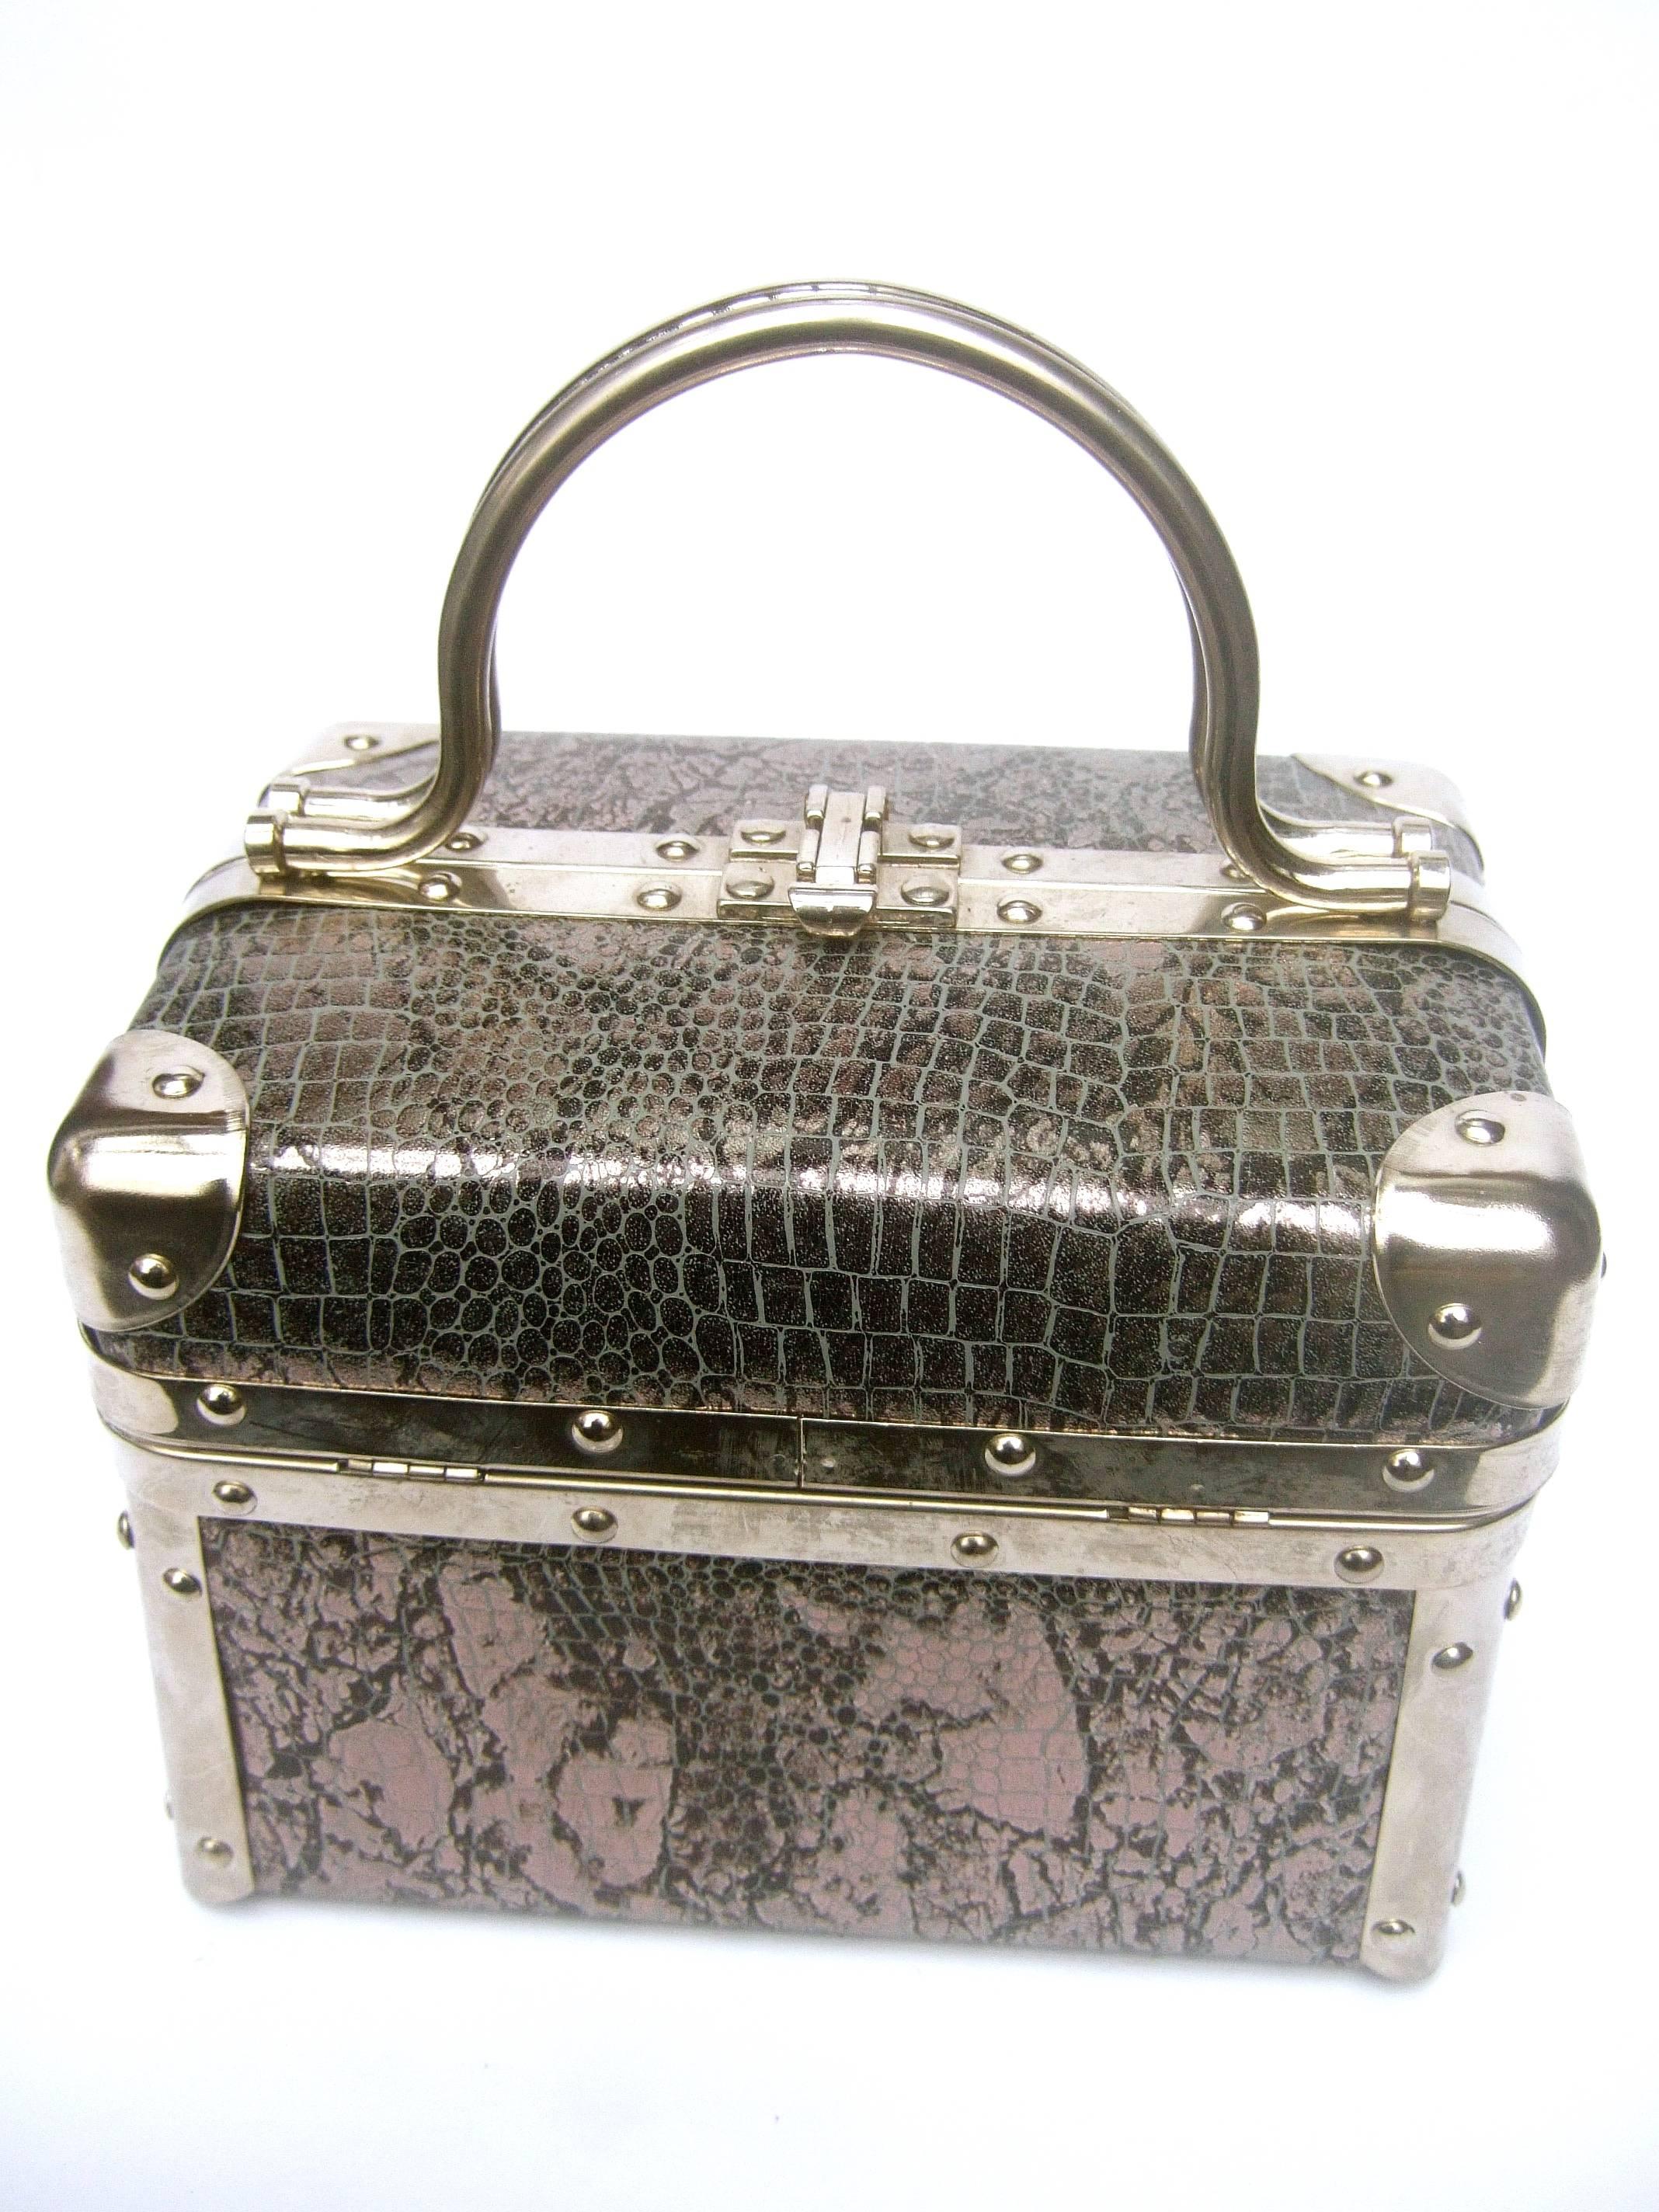 Borsa Bella Italian metallic embossed vinyl box purse c 1980s
The stylish Italian handbag is covered with a silver - gray
embossed vinyl covering that emulates reptile skin 

Designed with sleek chrome metal swivel handles
Accented with chrome metal